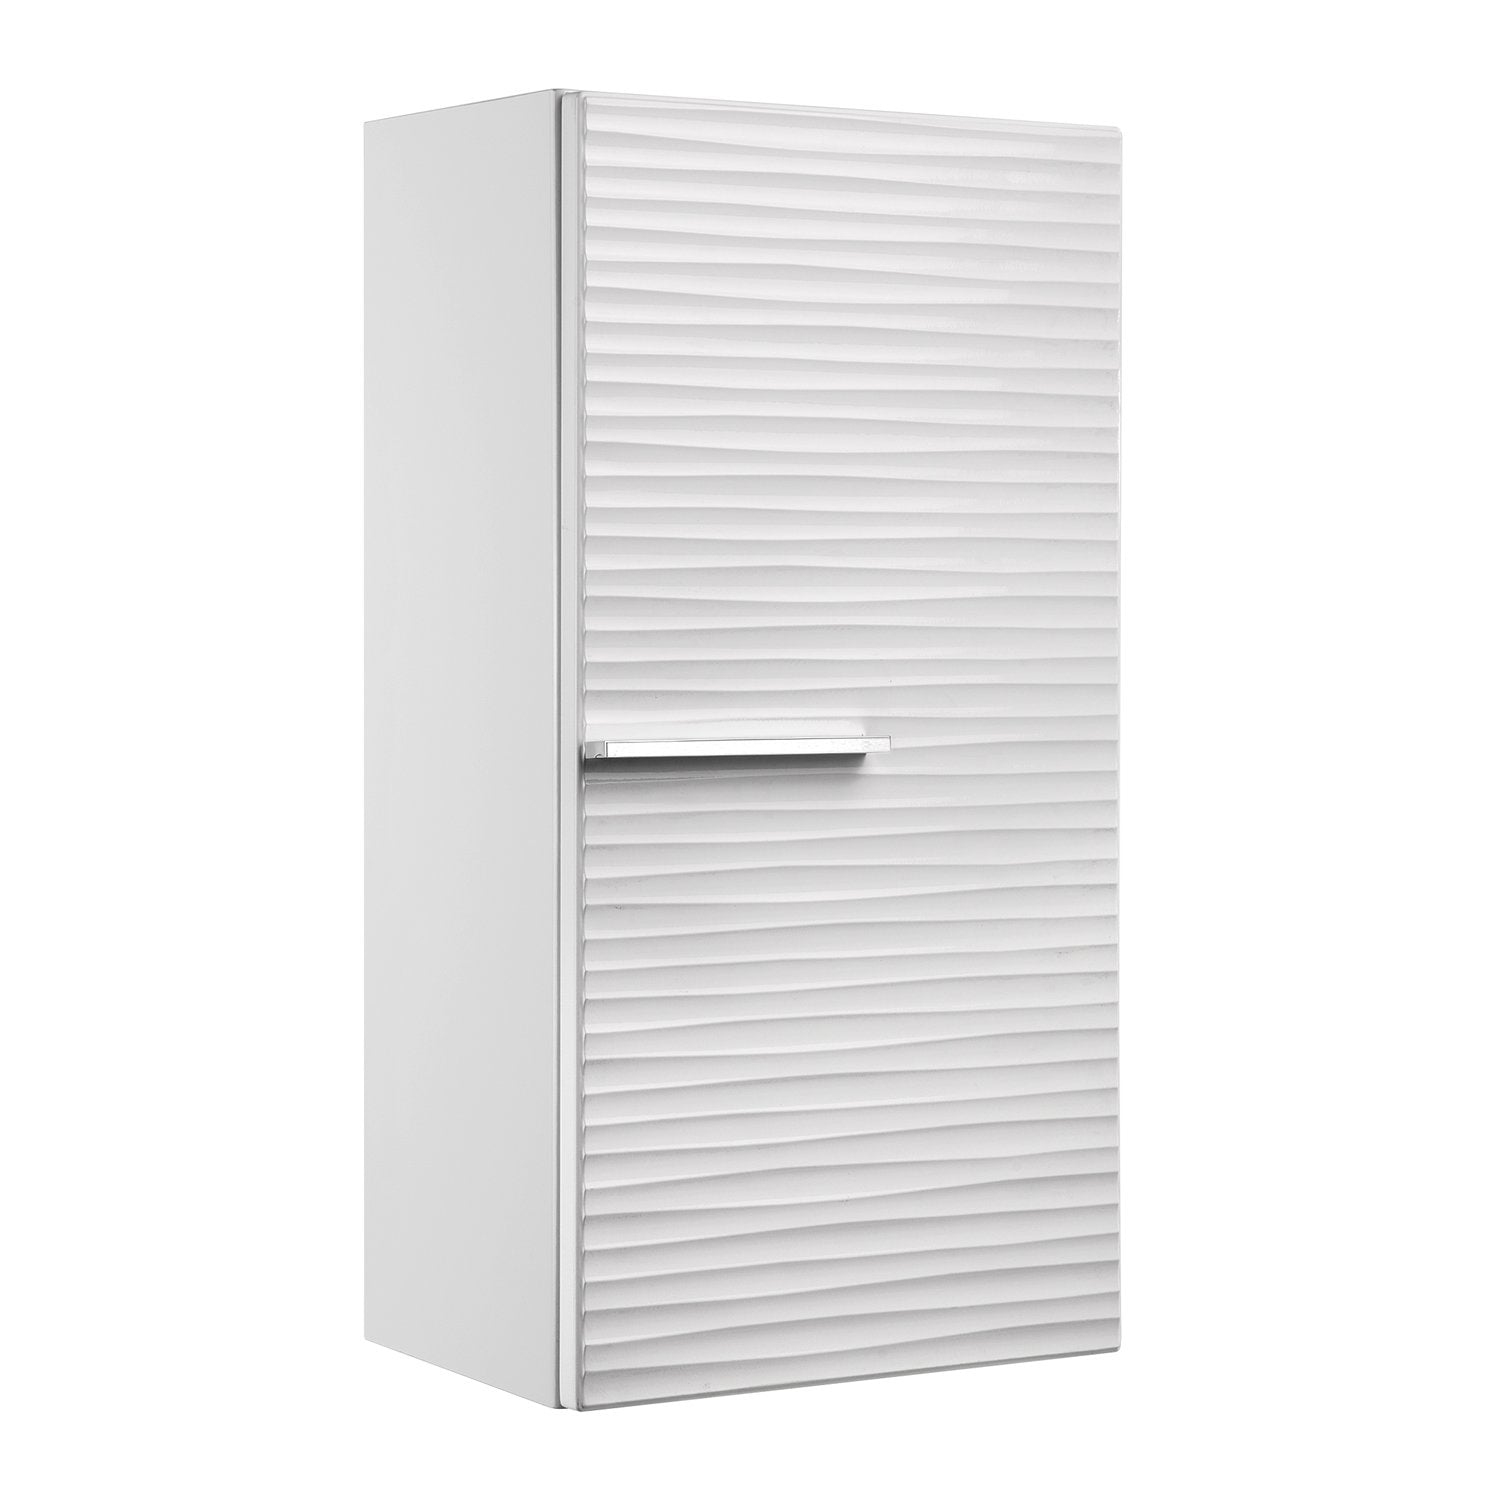 16" Small Side Cabinet, Wall Mount, 1 Door whit Handle and Soft Close and Right Opening, White, Serie Dune by VALENZUELA